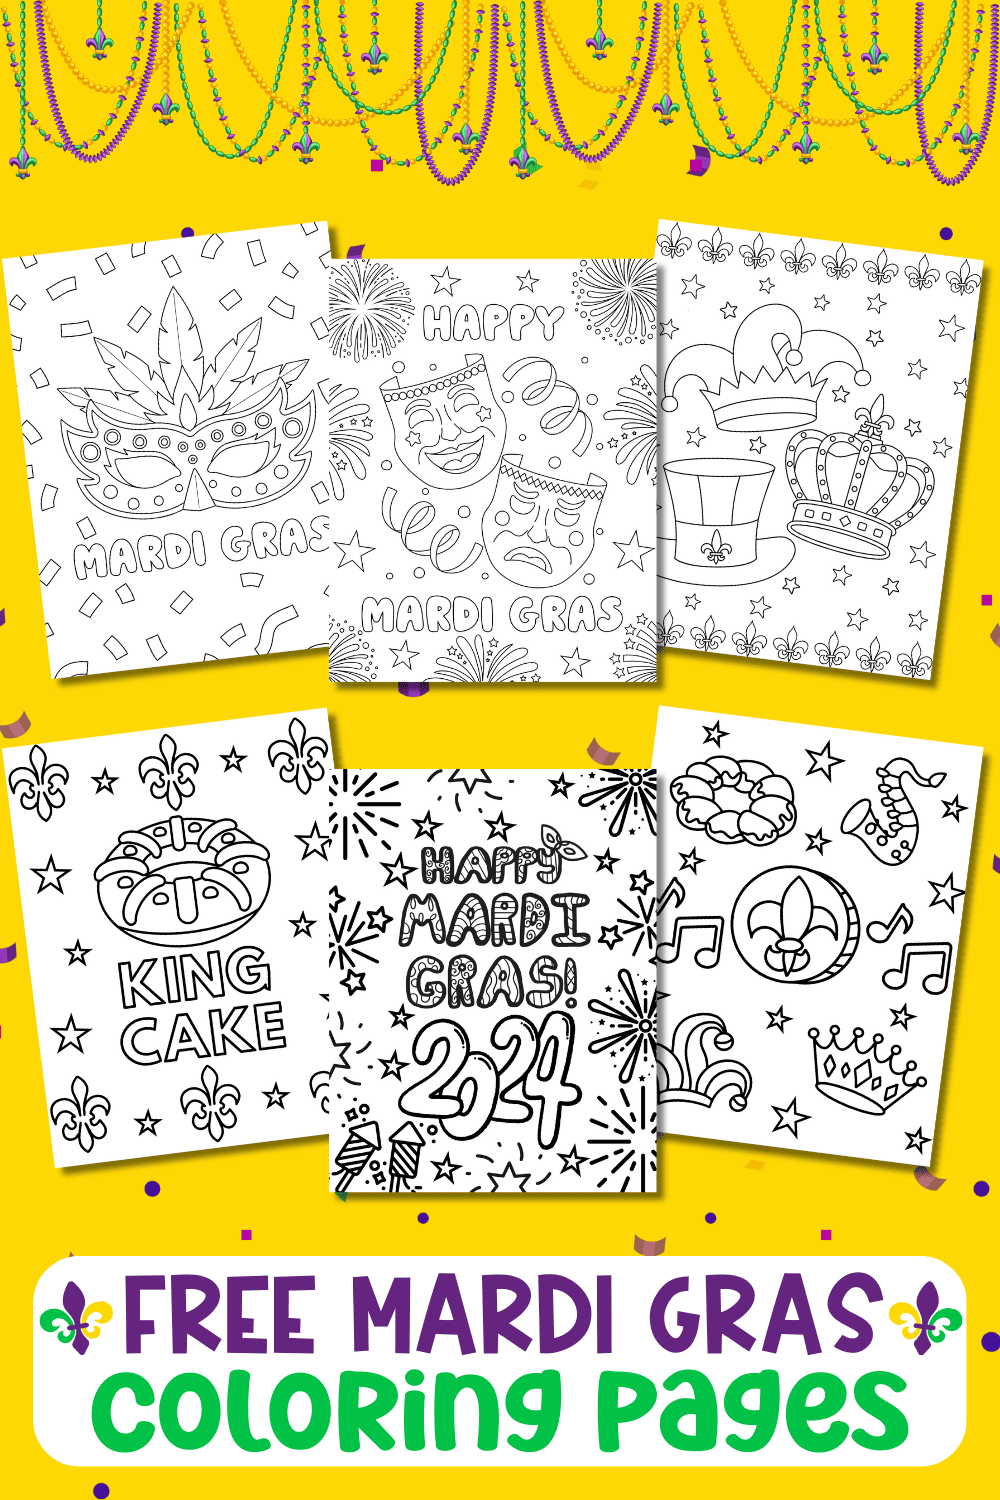 Free Printable Mardi Gras Coloring Pages for Kids